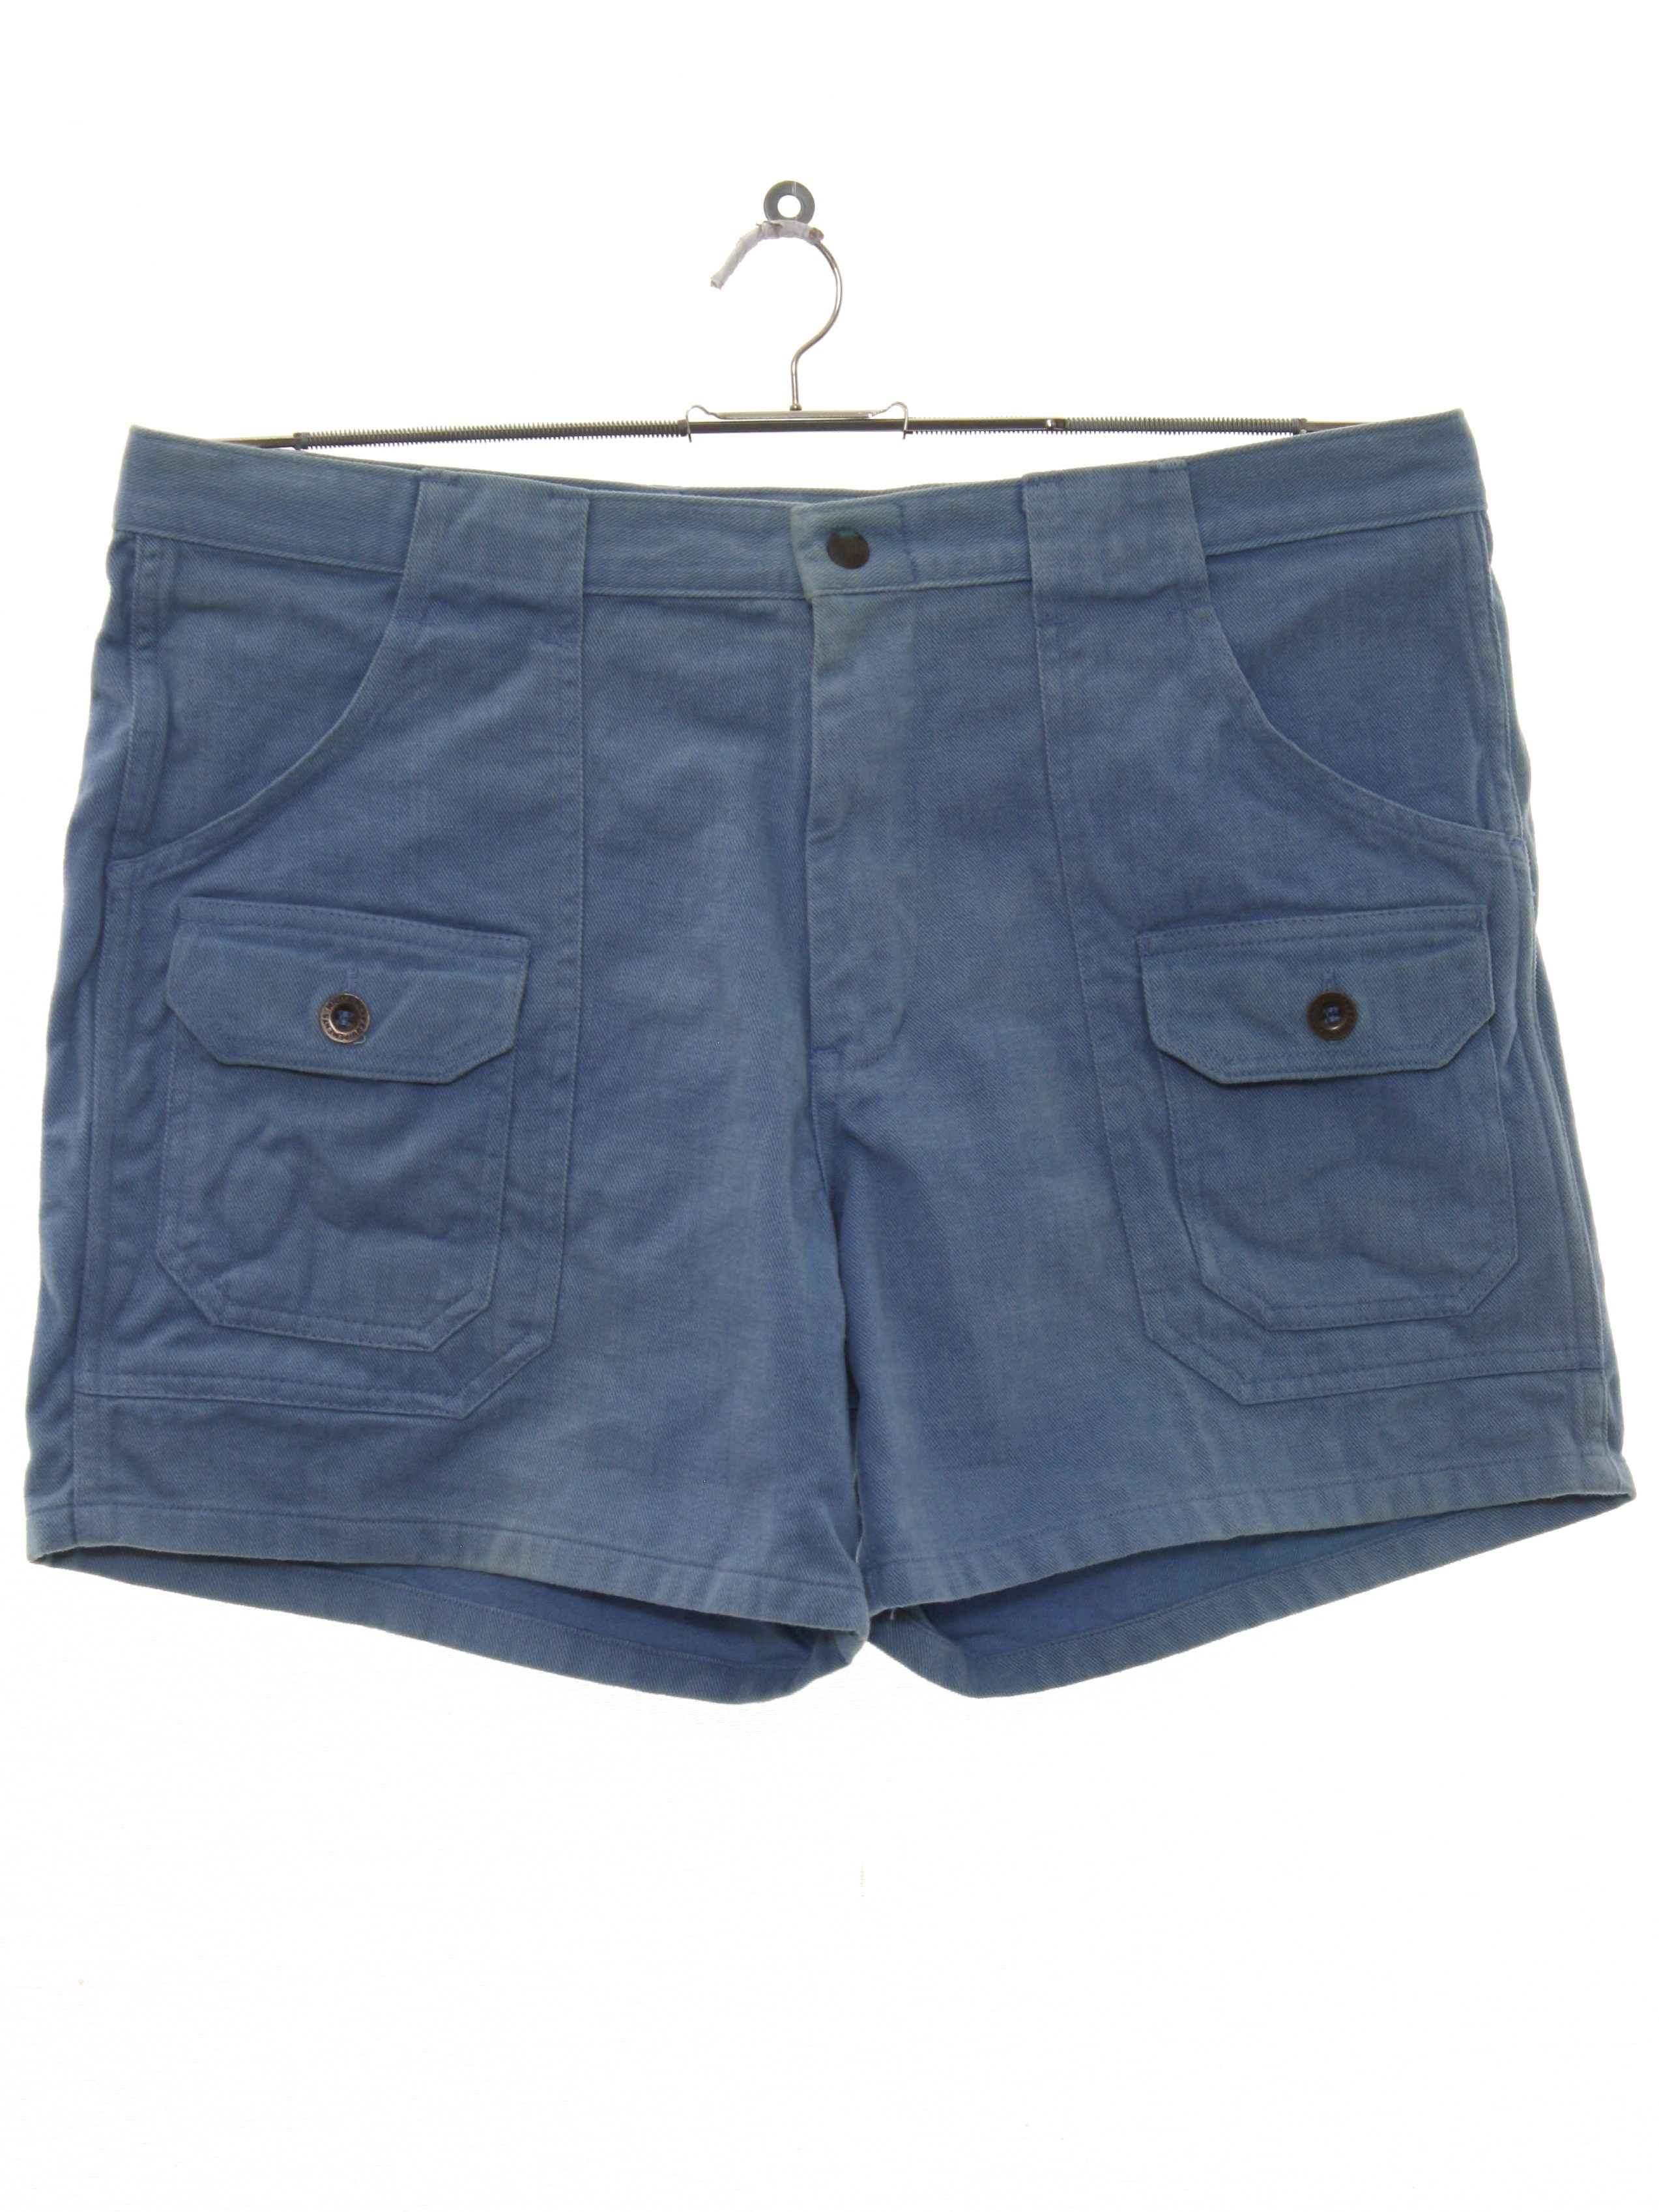 Retro 70's Shorts: Late 70s or Early 80s -Militaries Equipment- Mens ...